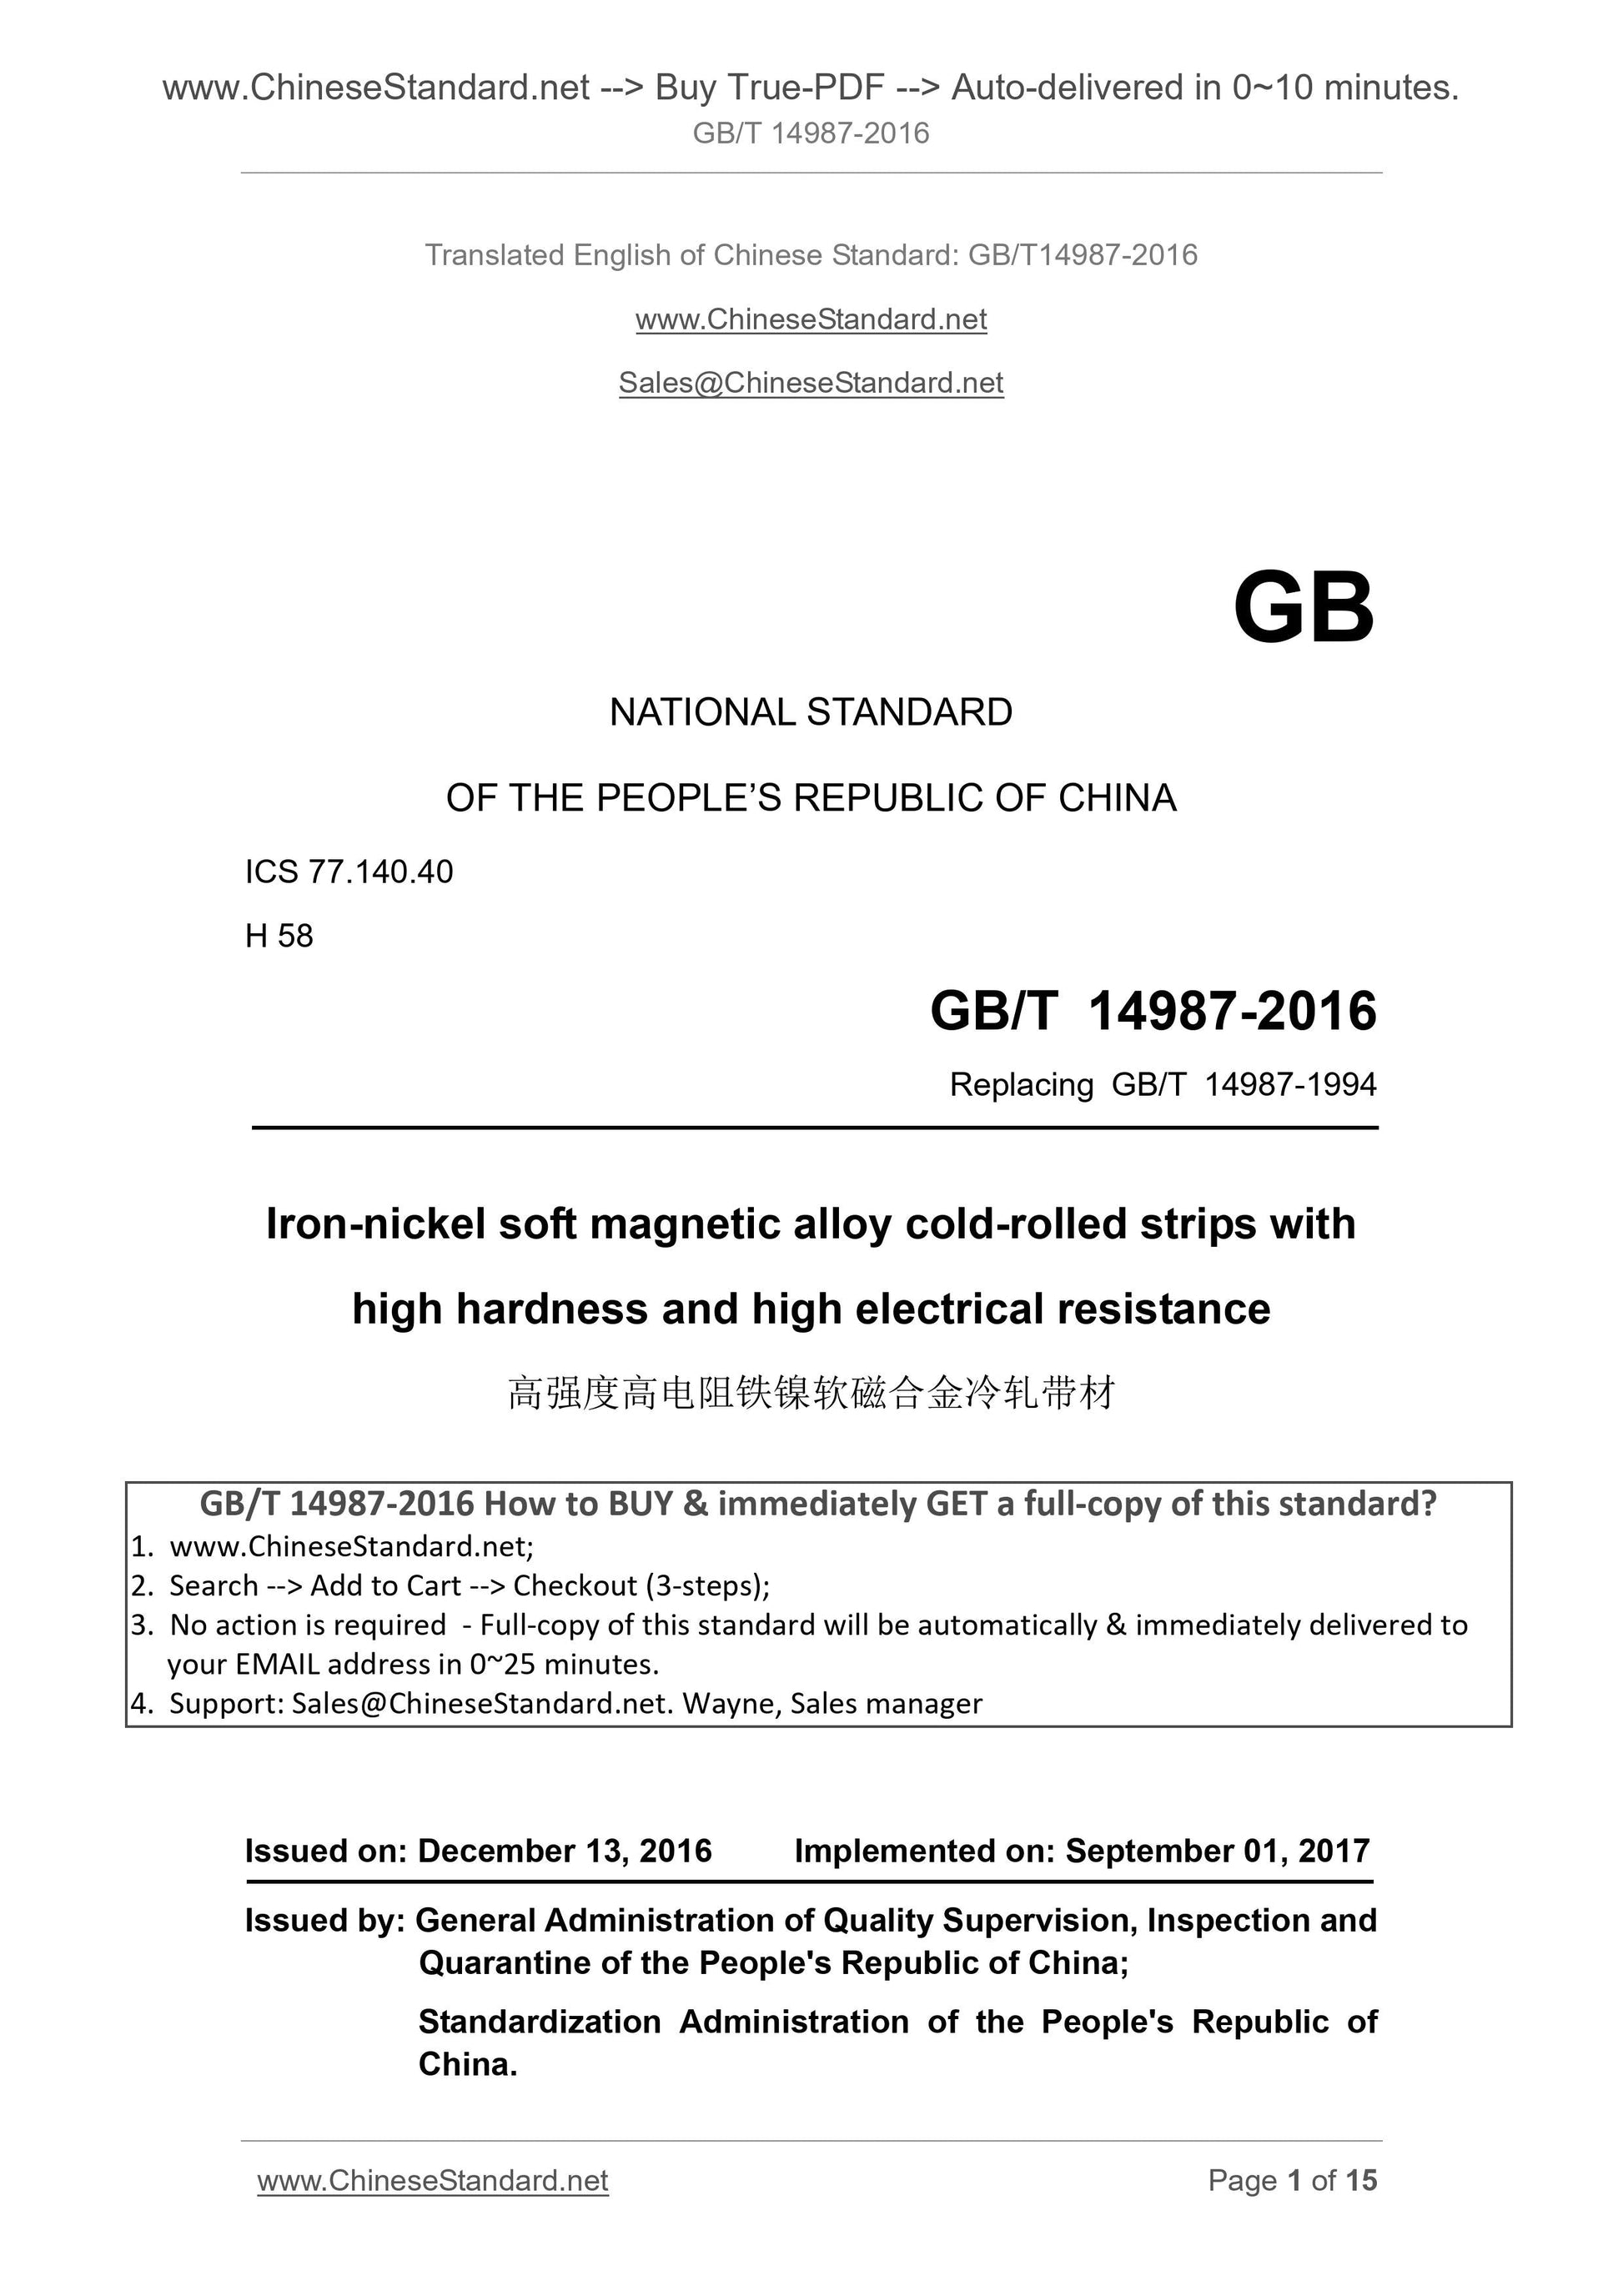 GB/T 14987-2016 Page 1